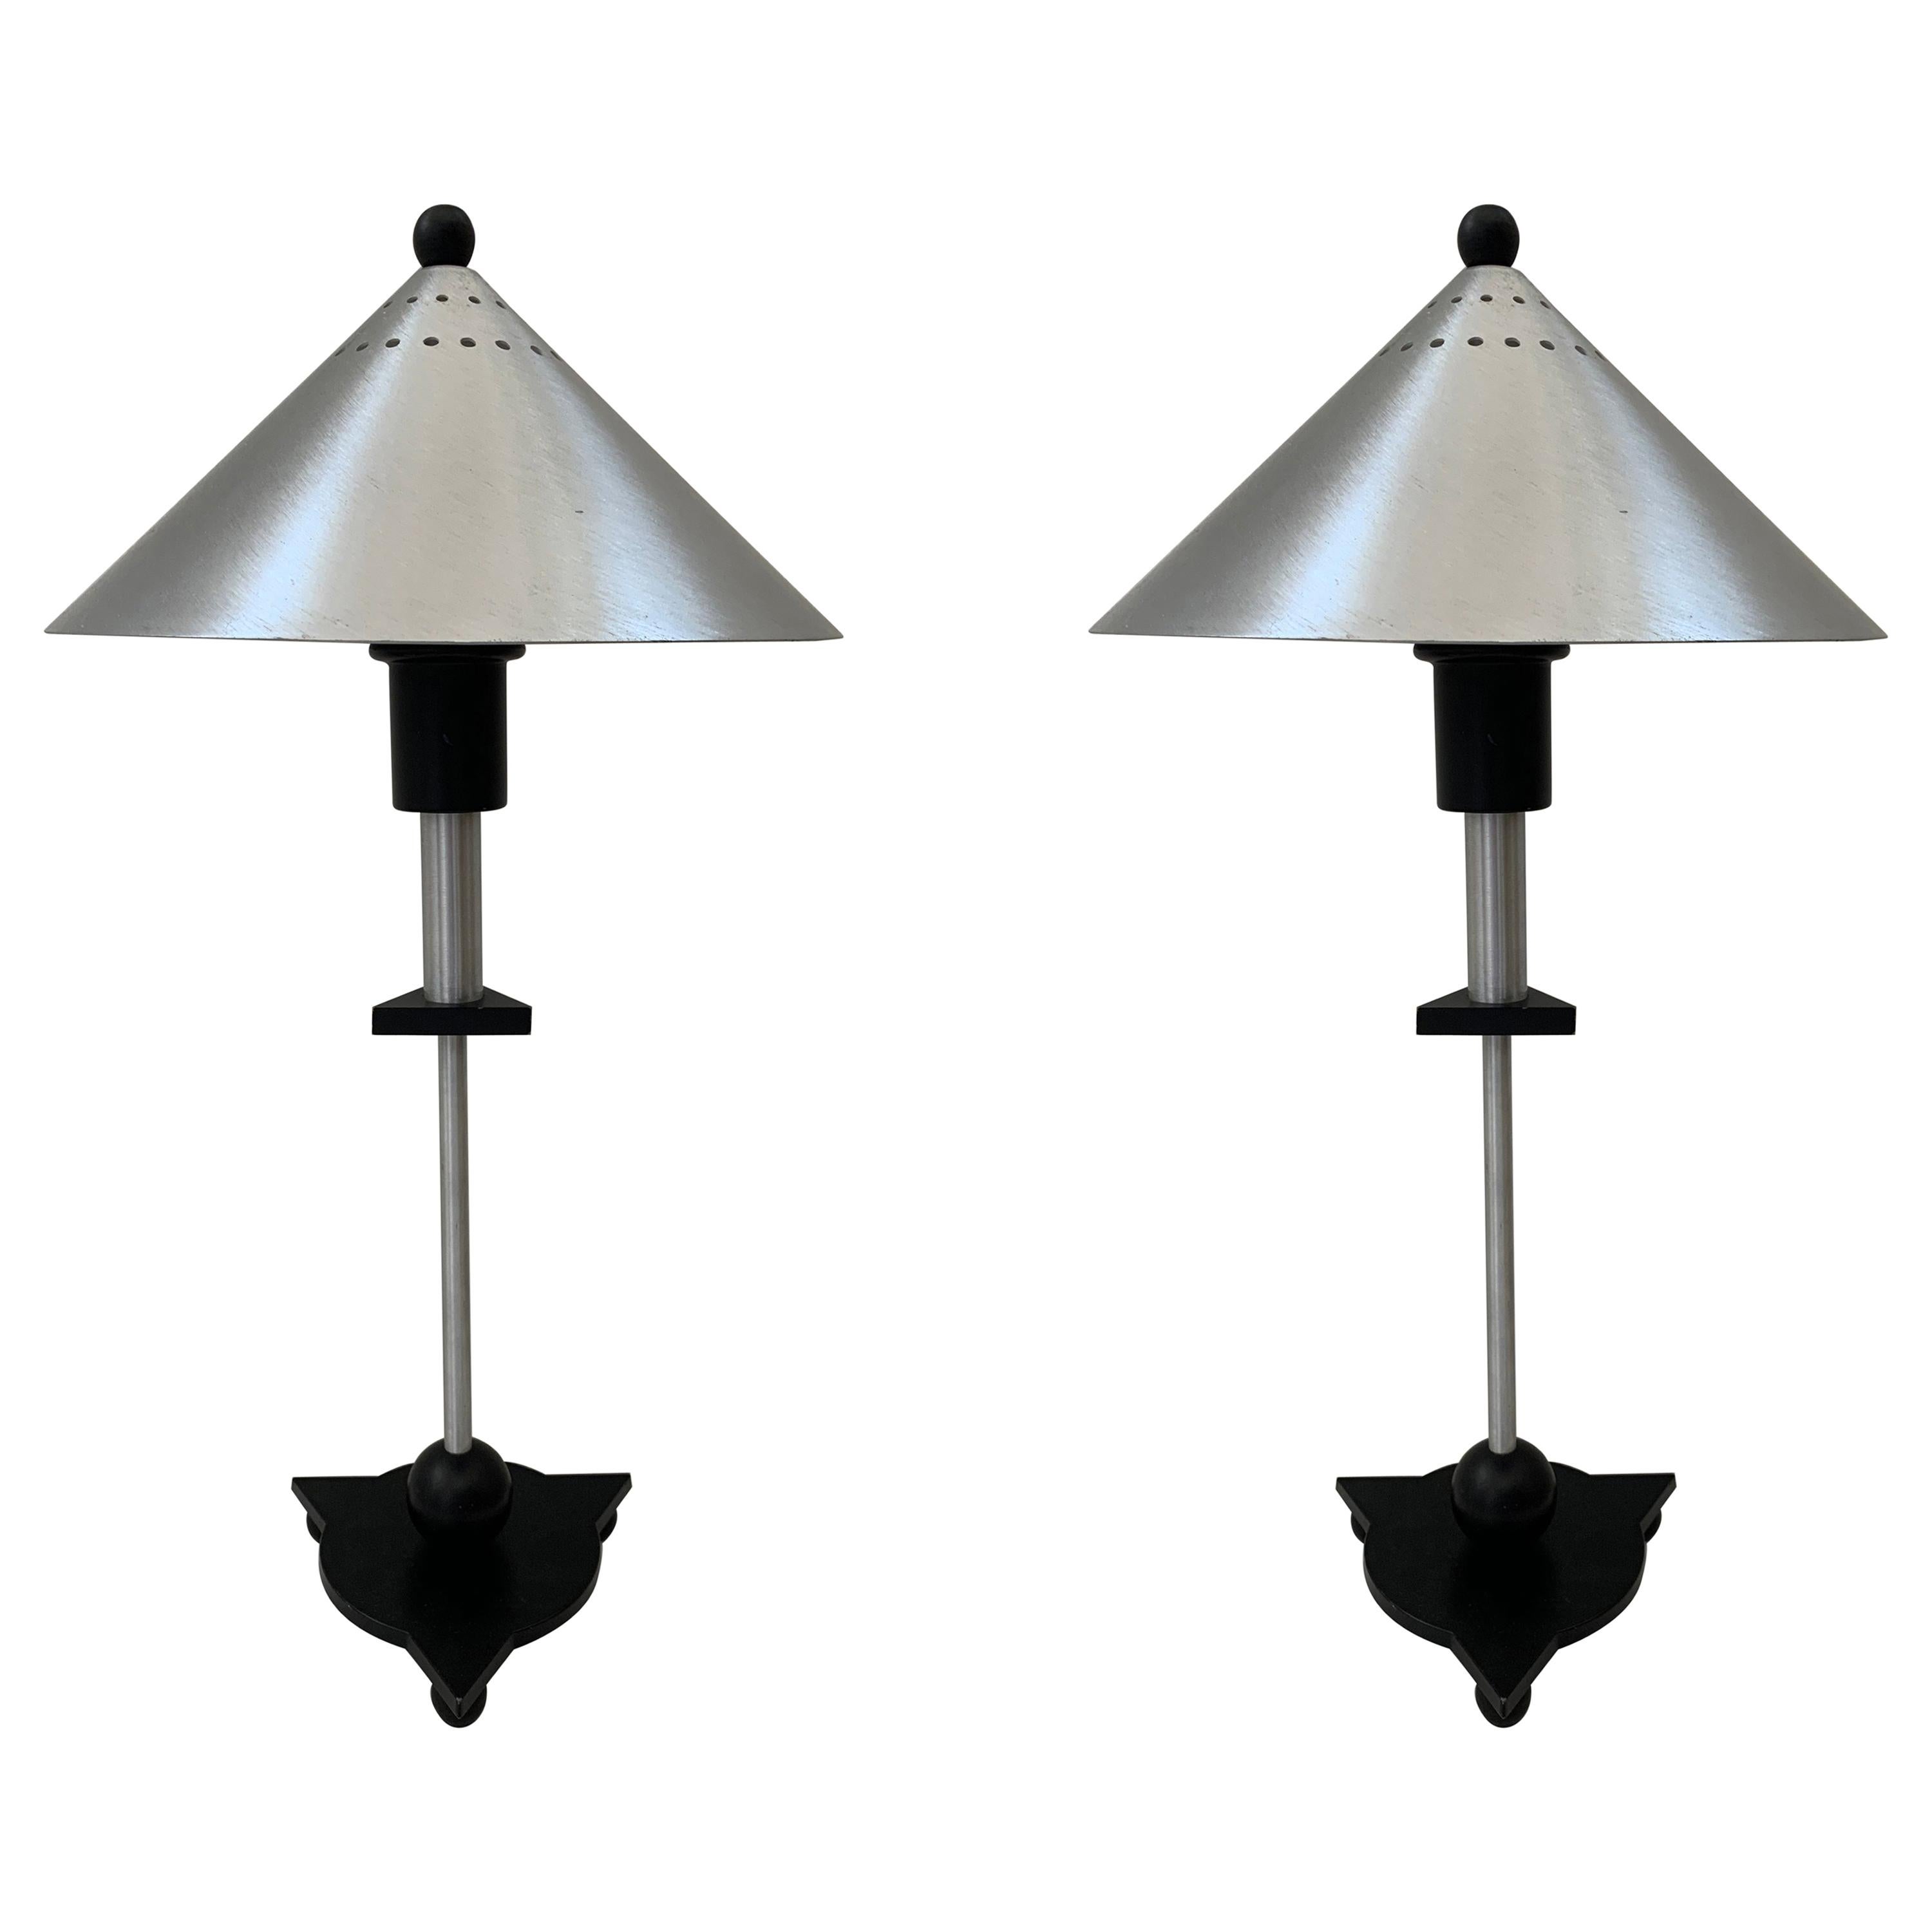 Pair of Postmodern Steel and Black Wood Table Lamps by BE-YANG, 1980s For Sale